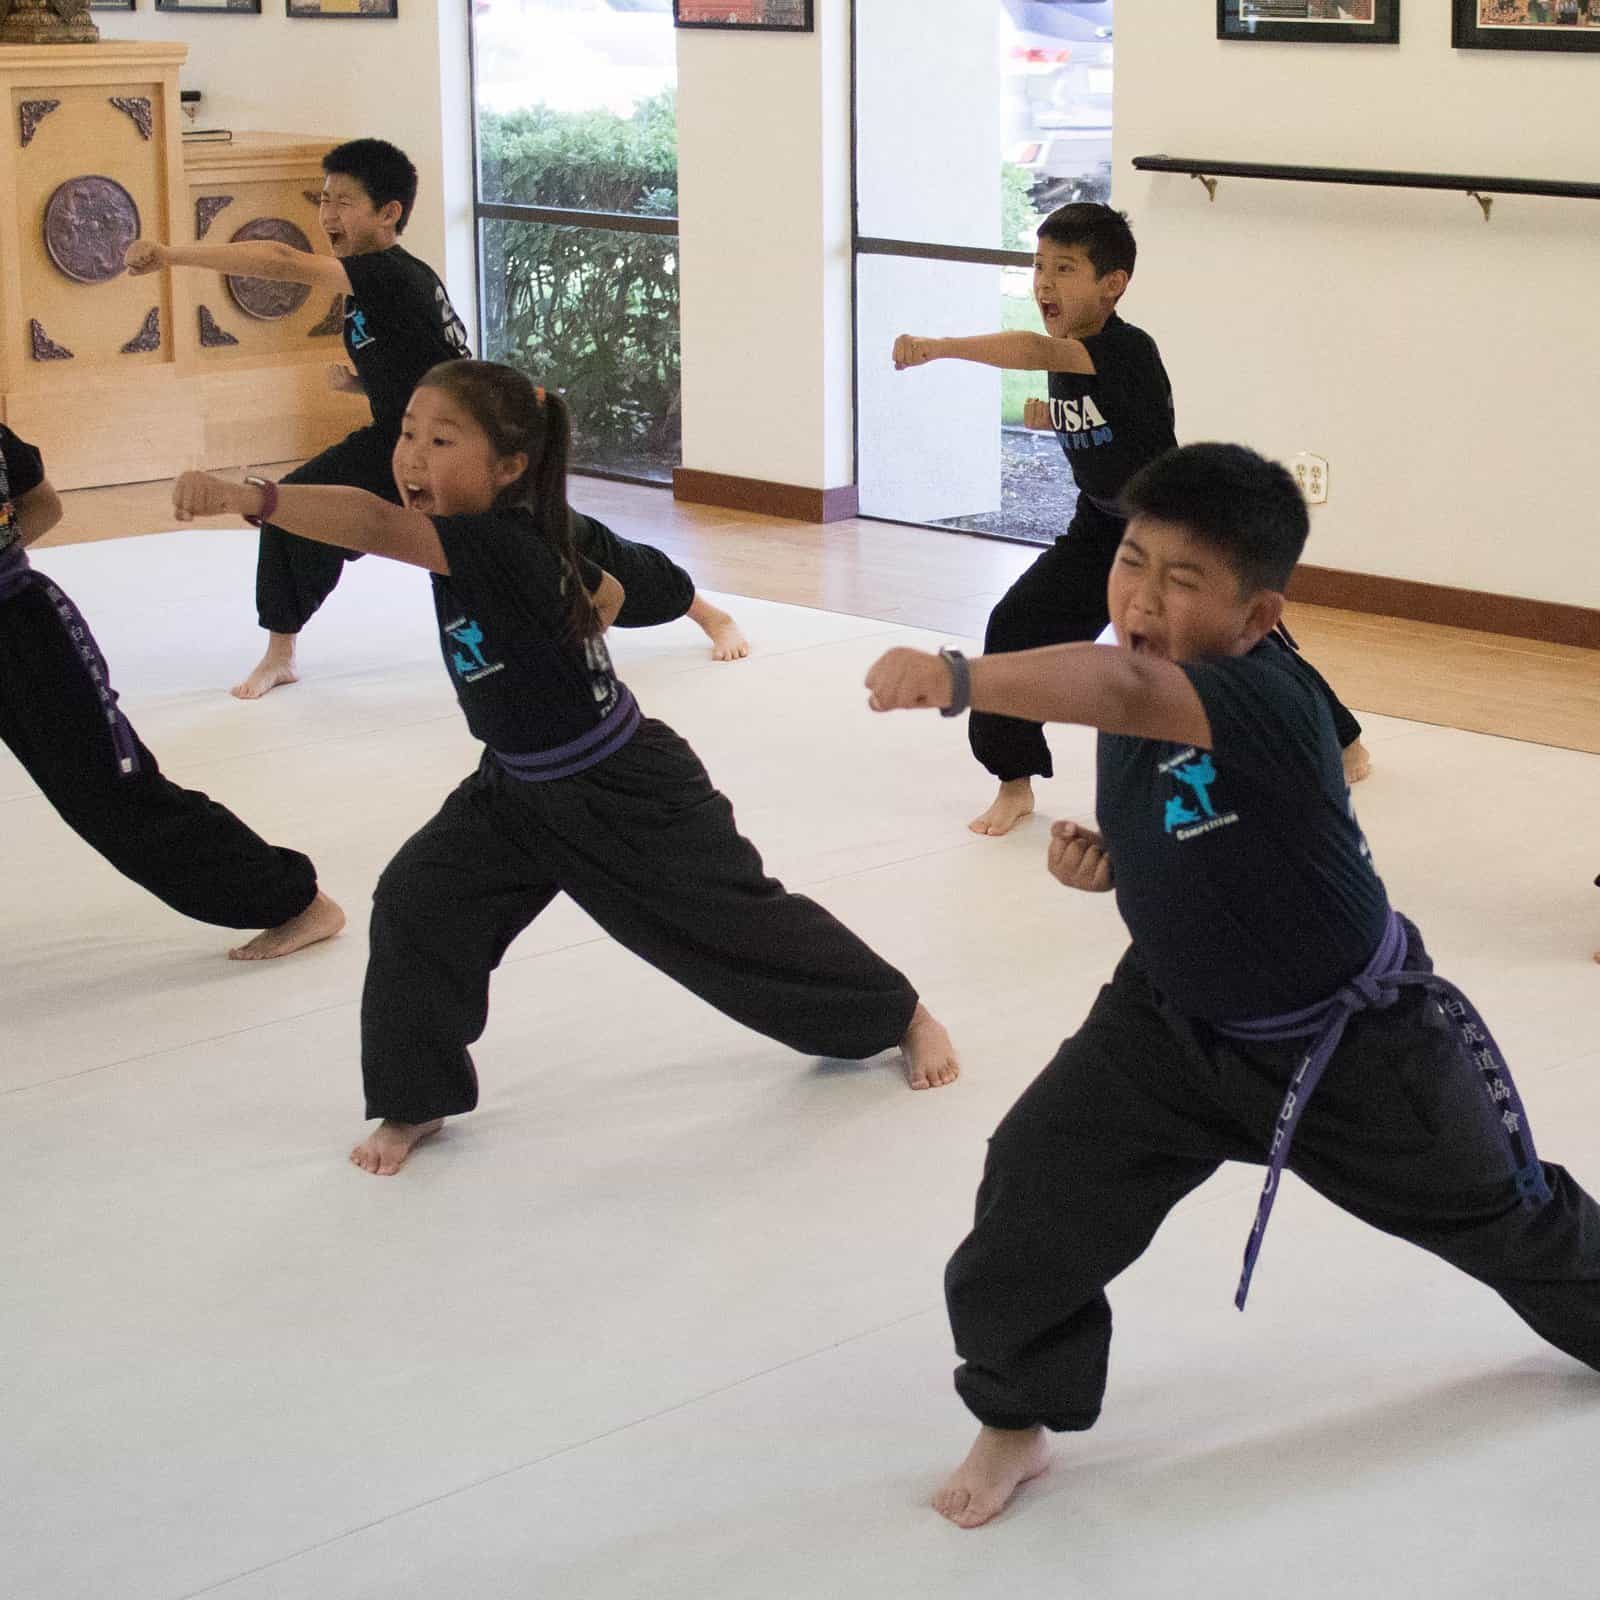 Are most Chinese people Kung-Fu Masters? - Quora